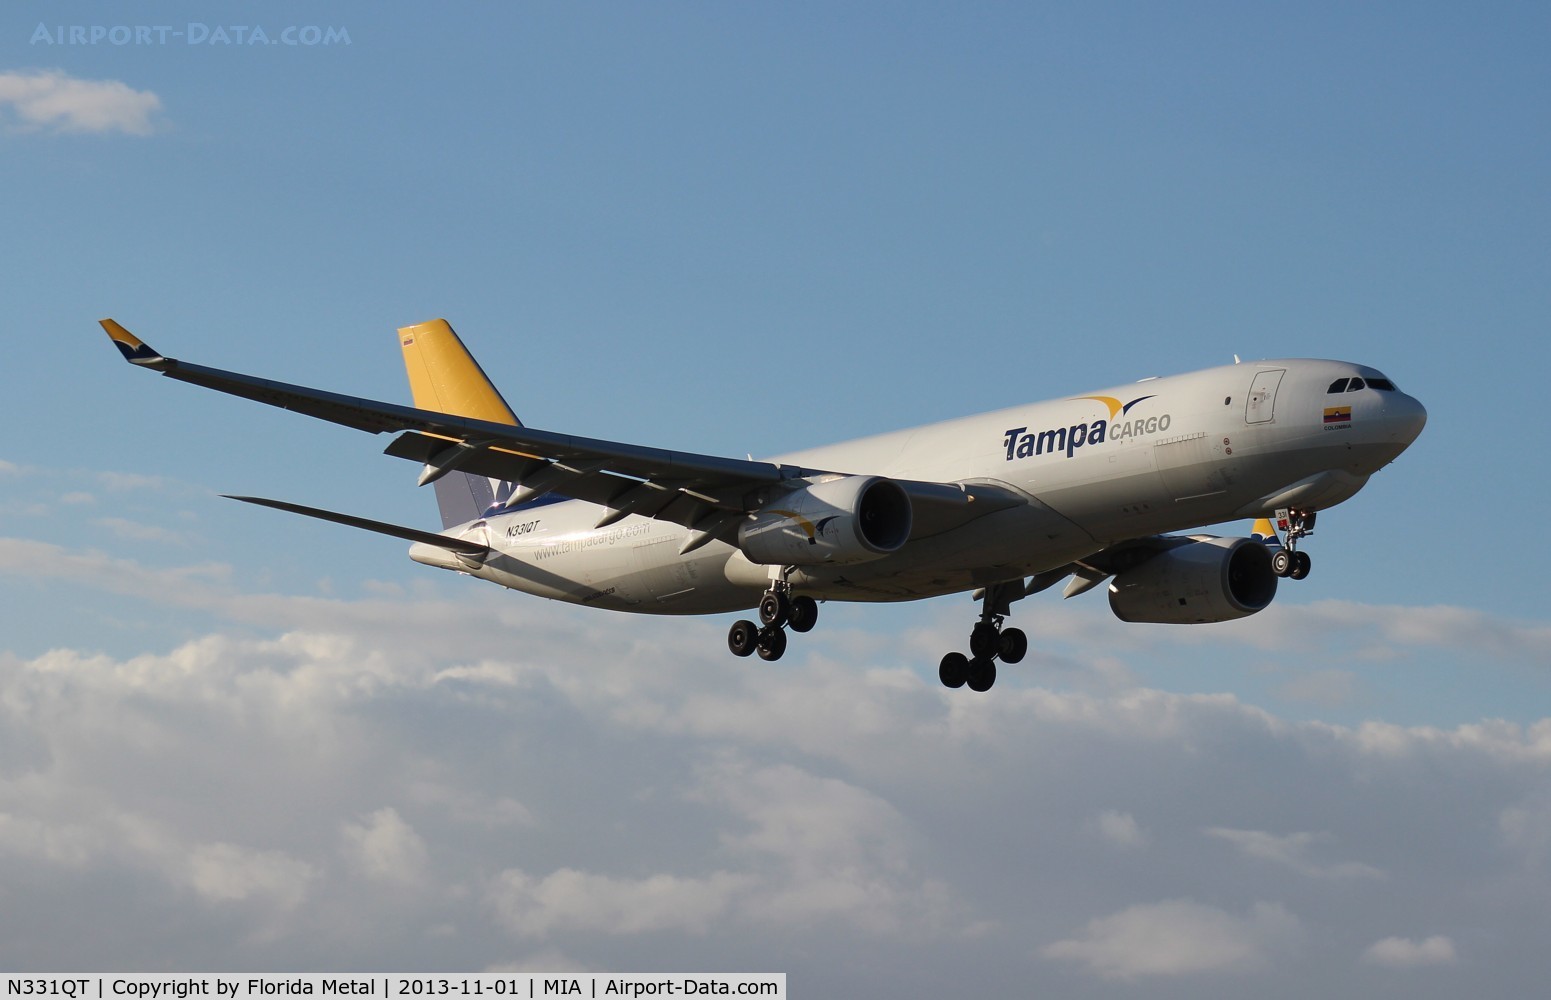 N331QT, 2012 Airbus A330-243F C/N 1380, Tampa Colombia Cargo A330-200F